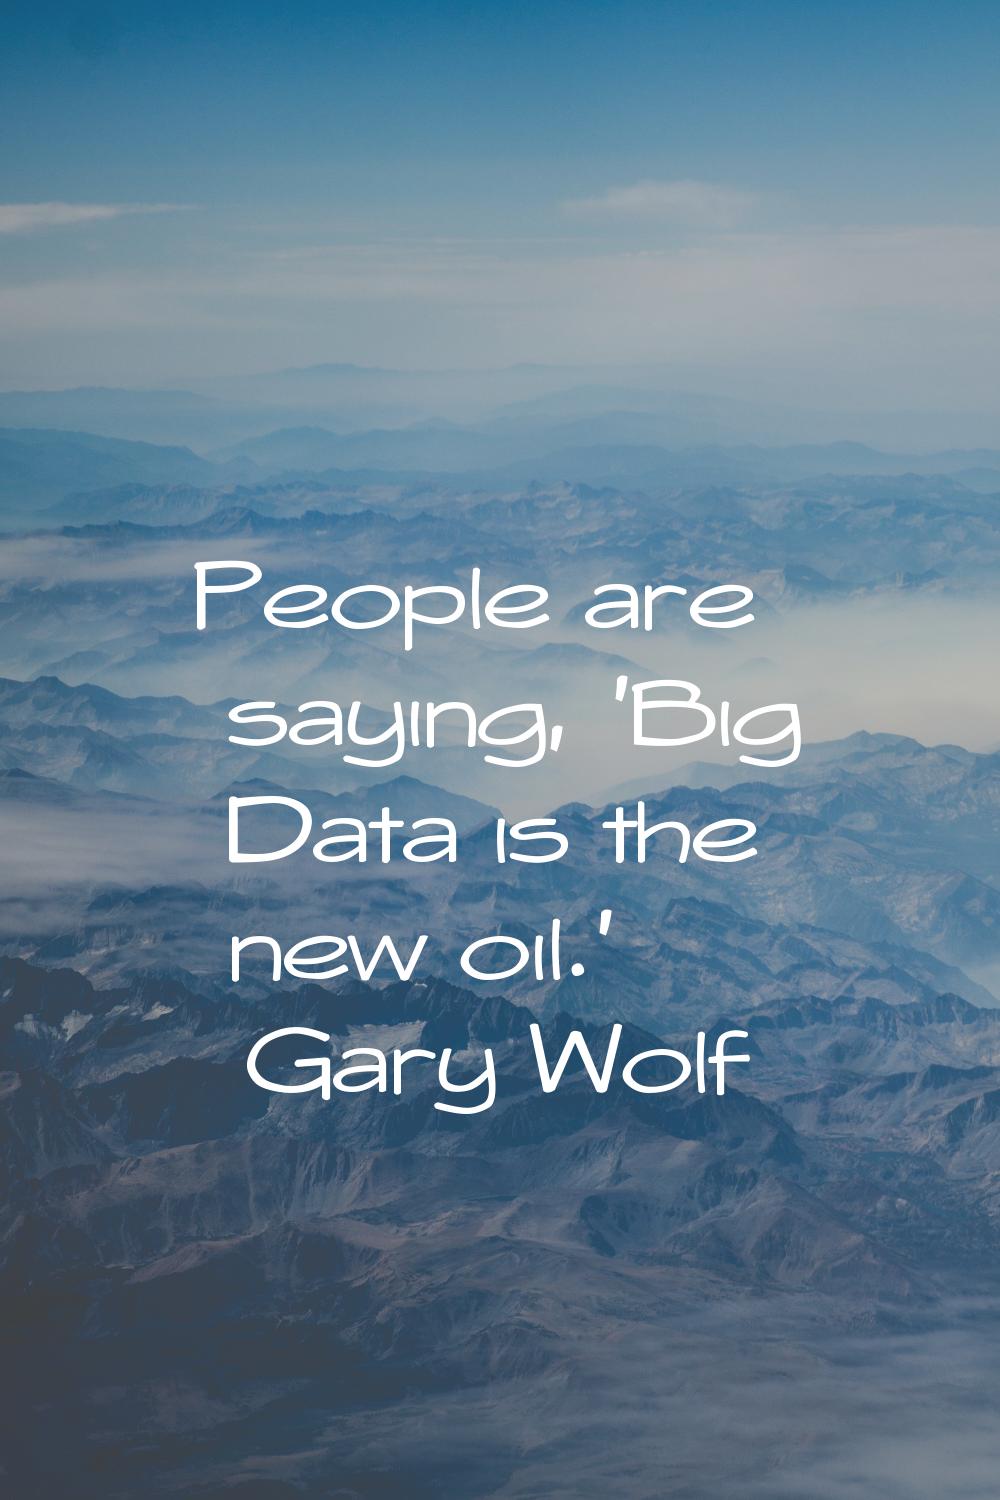 People are saying, 'Big Data is the new oil.'